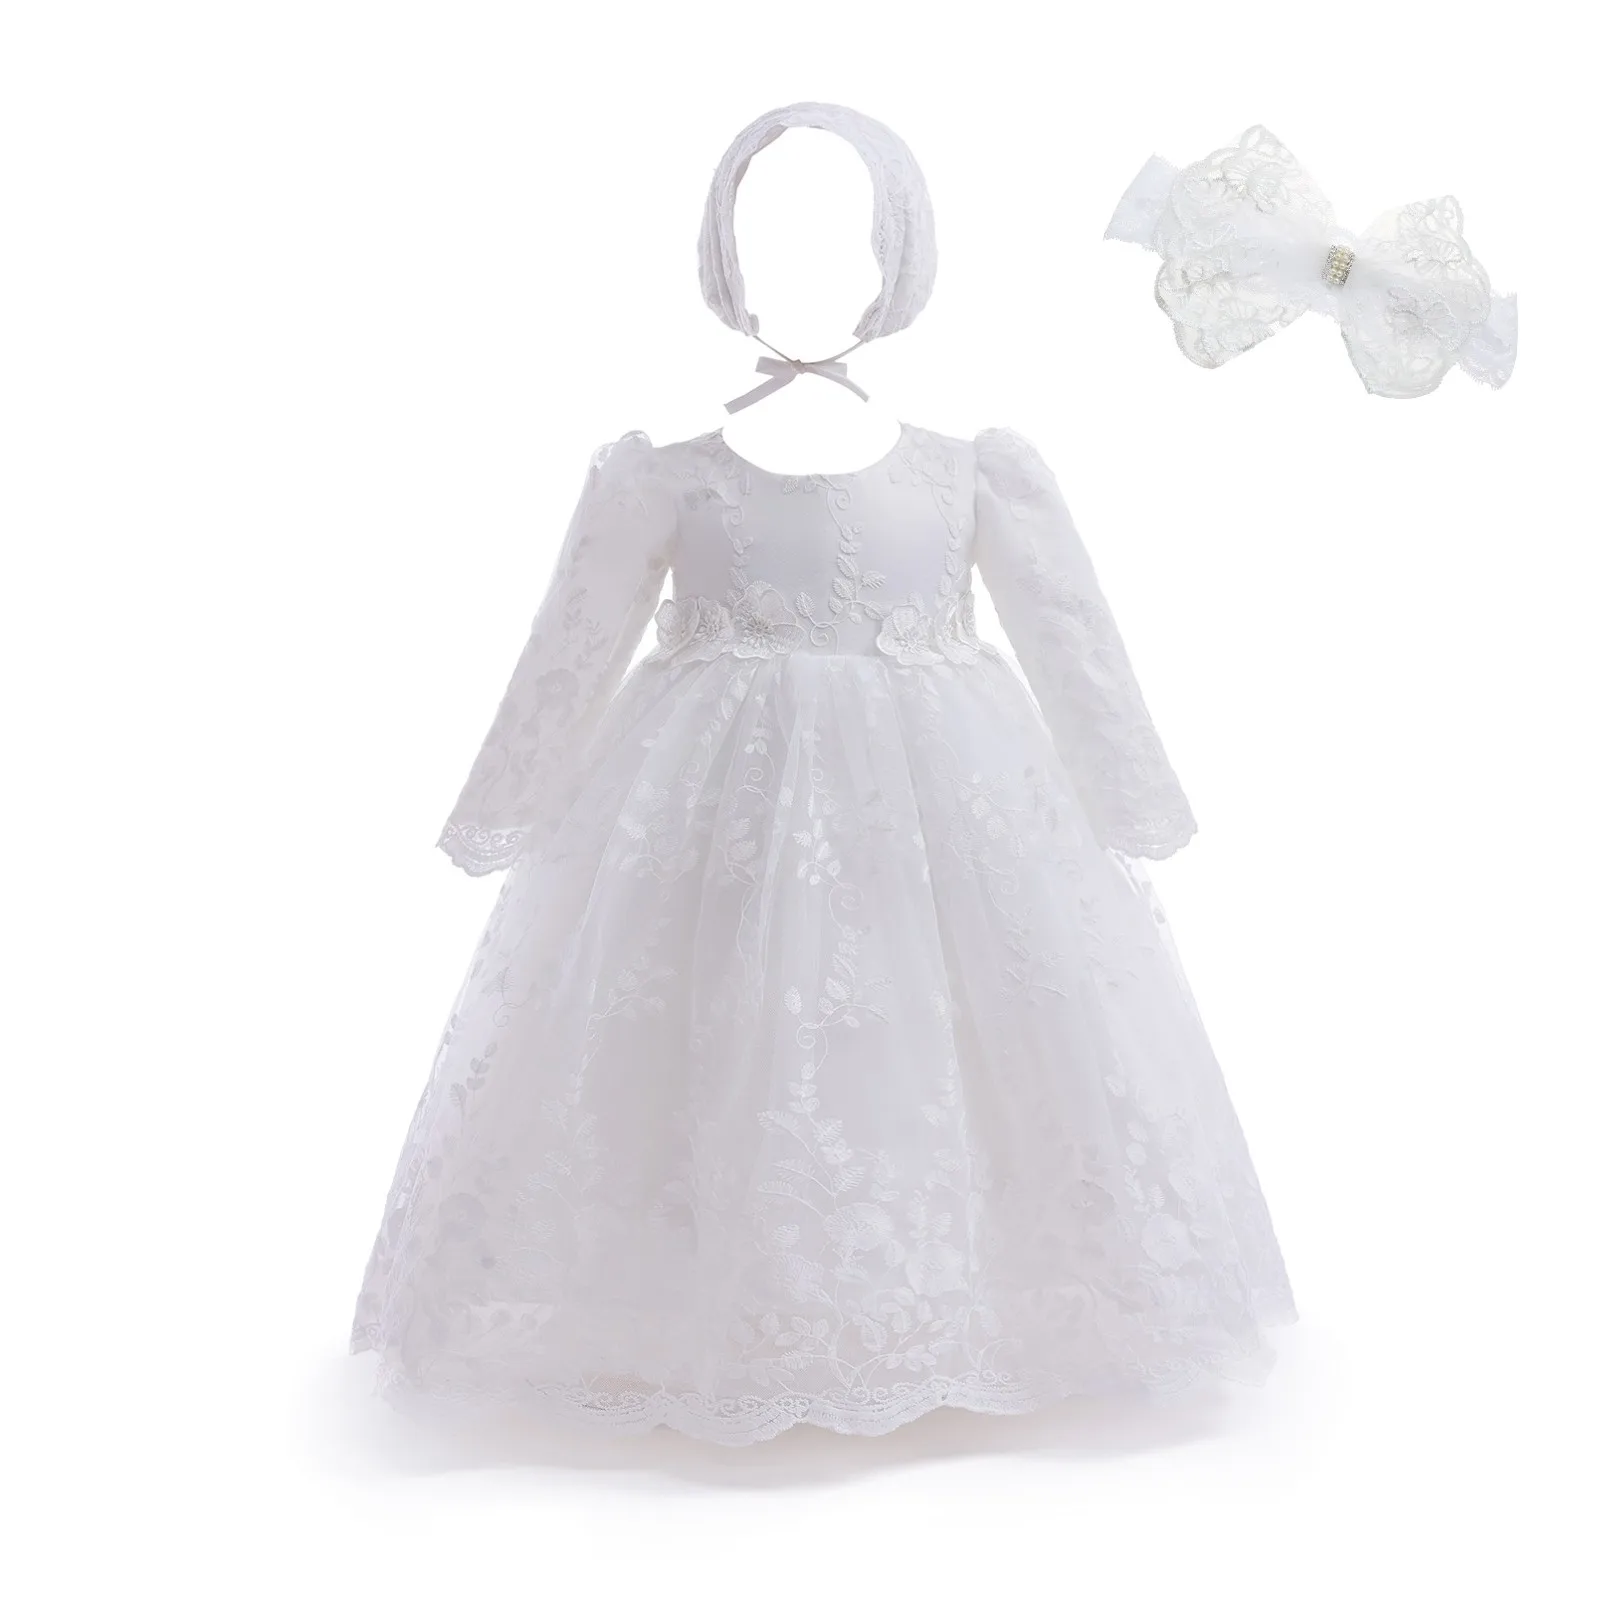 

Vintage Long Sleve Baby Girl Baptism Dresses for Girls 1st year birthday party wedding Christening baby infant clothing bebes